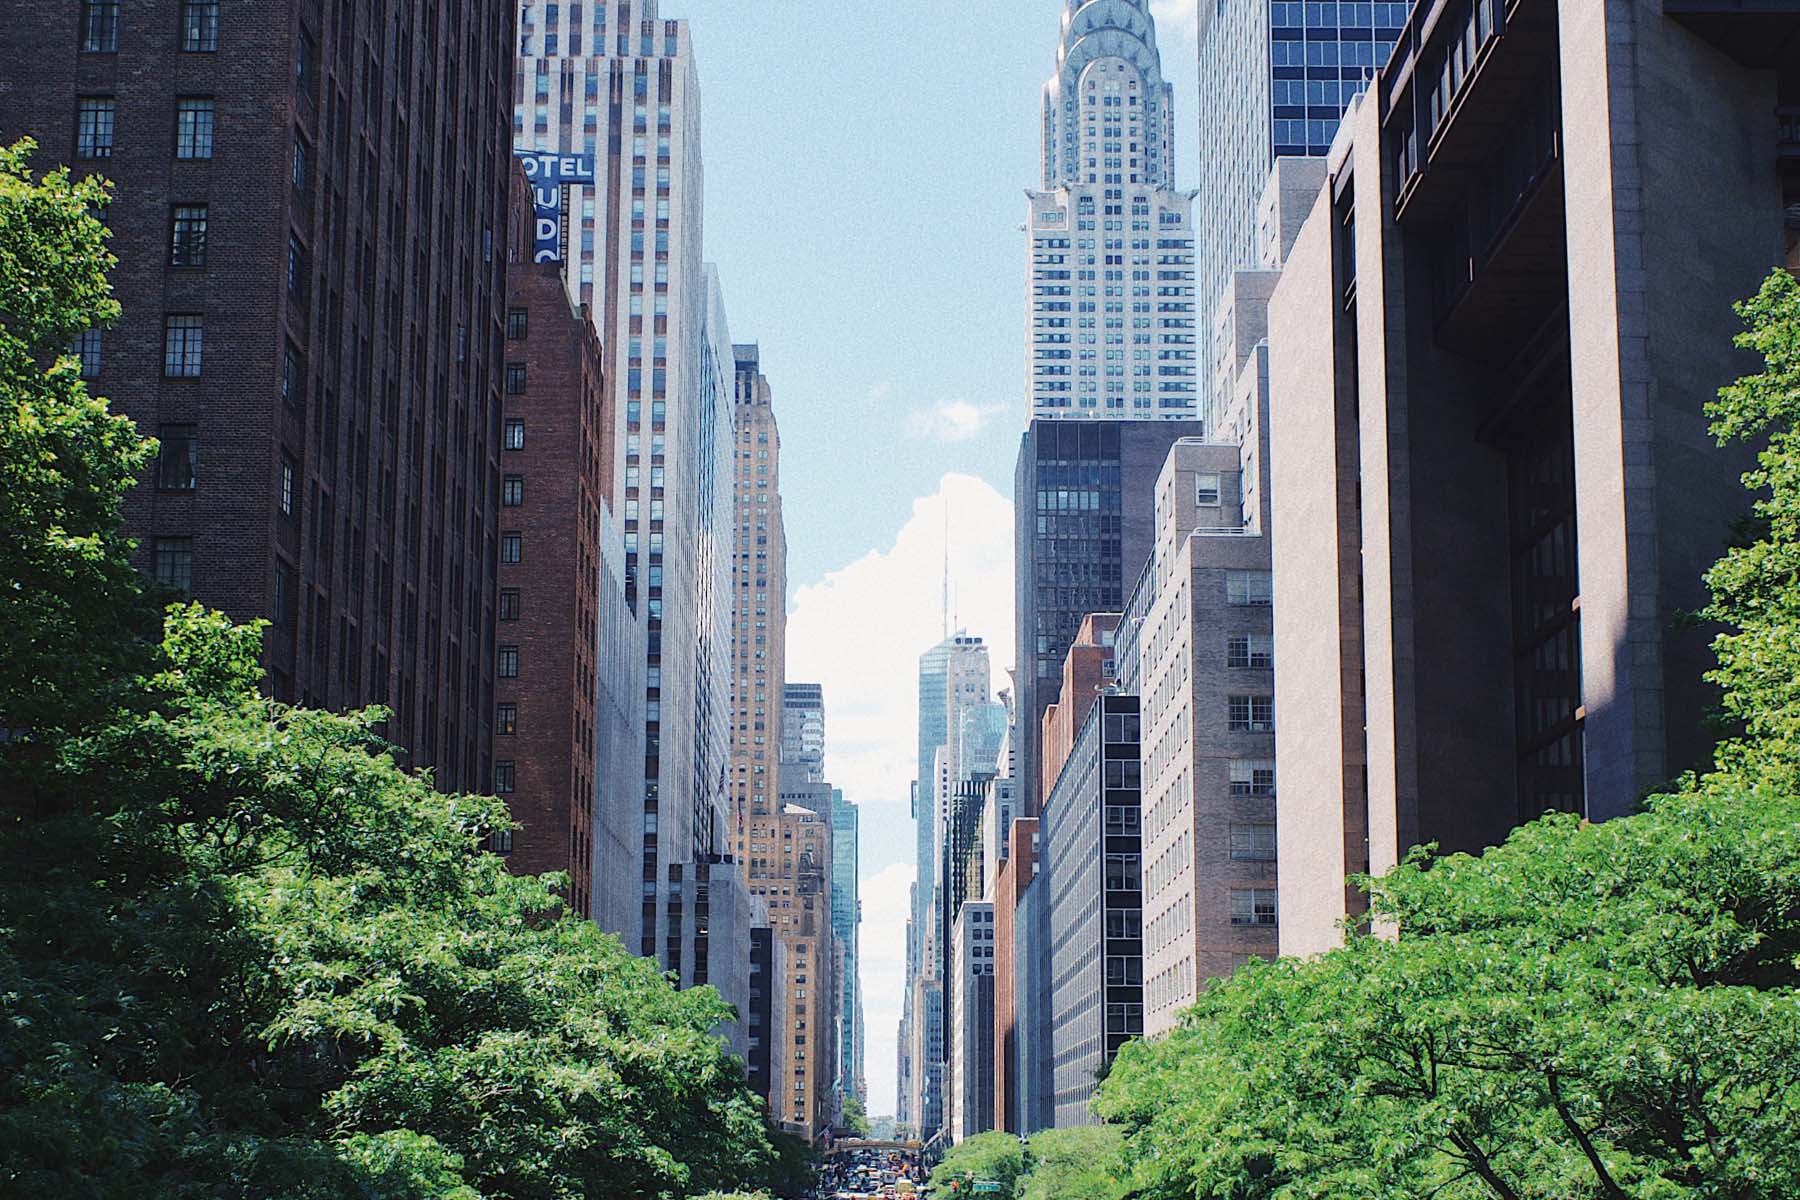 Looking down a city street with skyscrapers lining the street